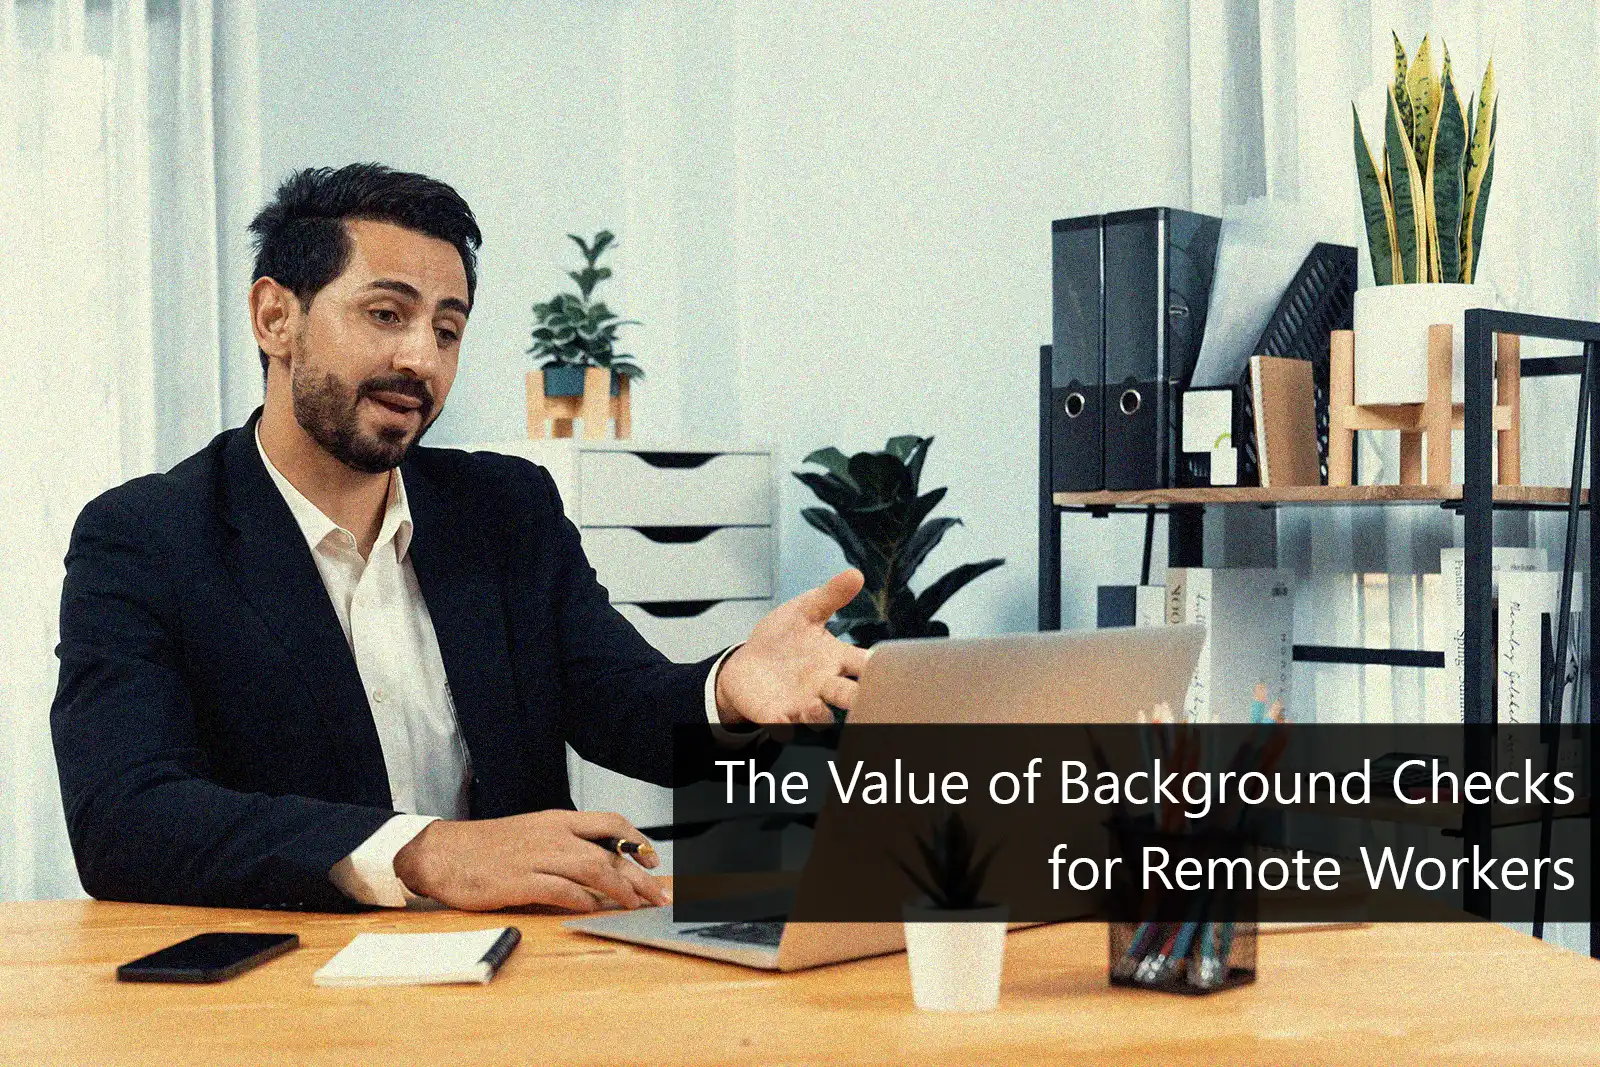 The Value of Background Checks for Remote Workers